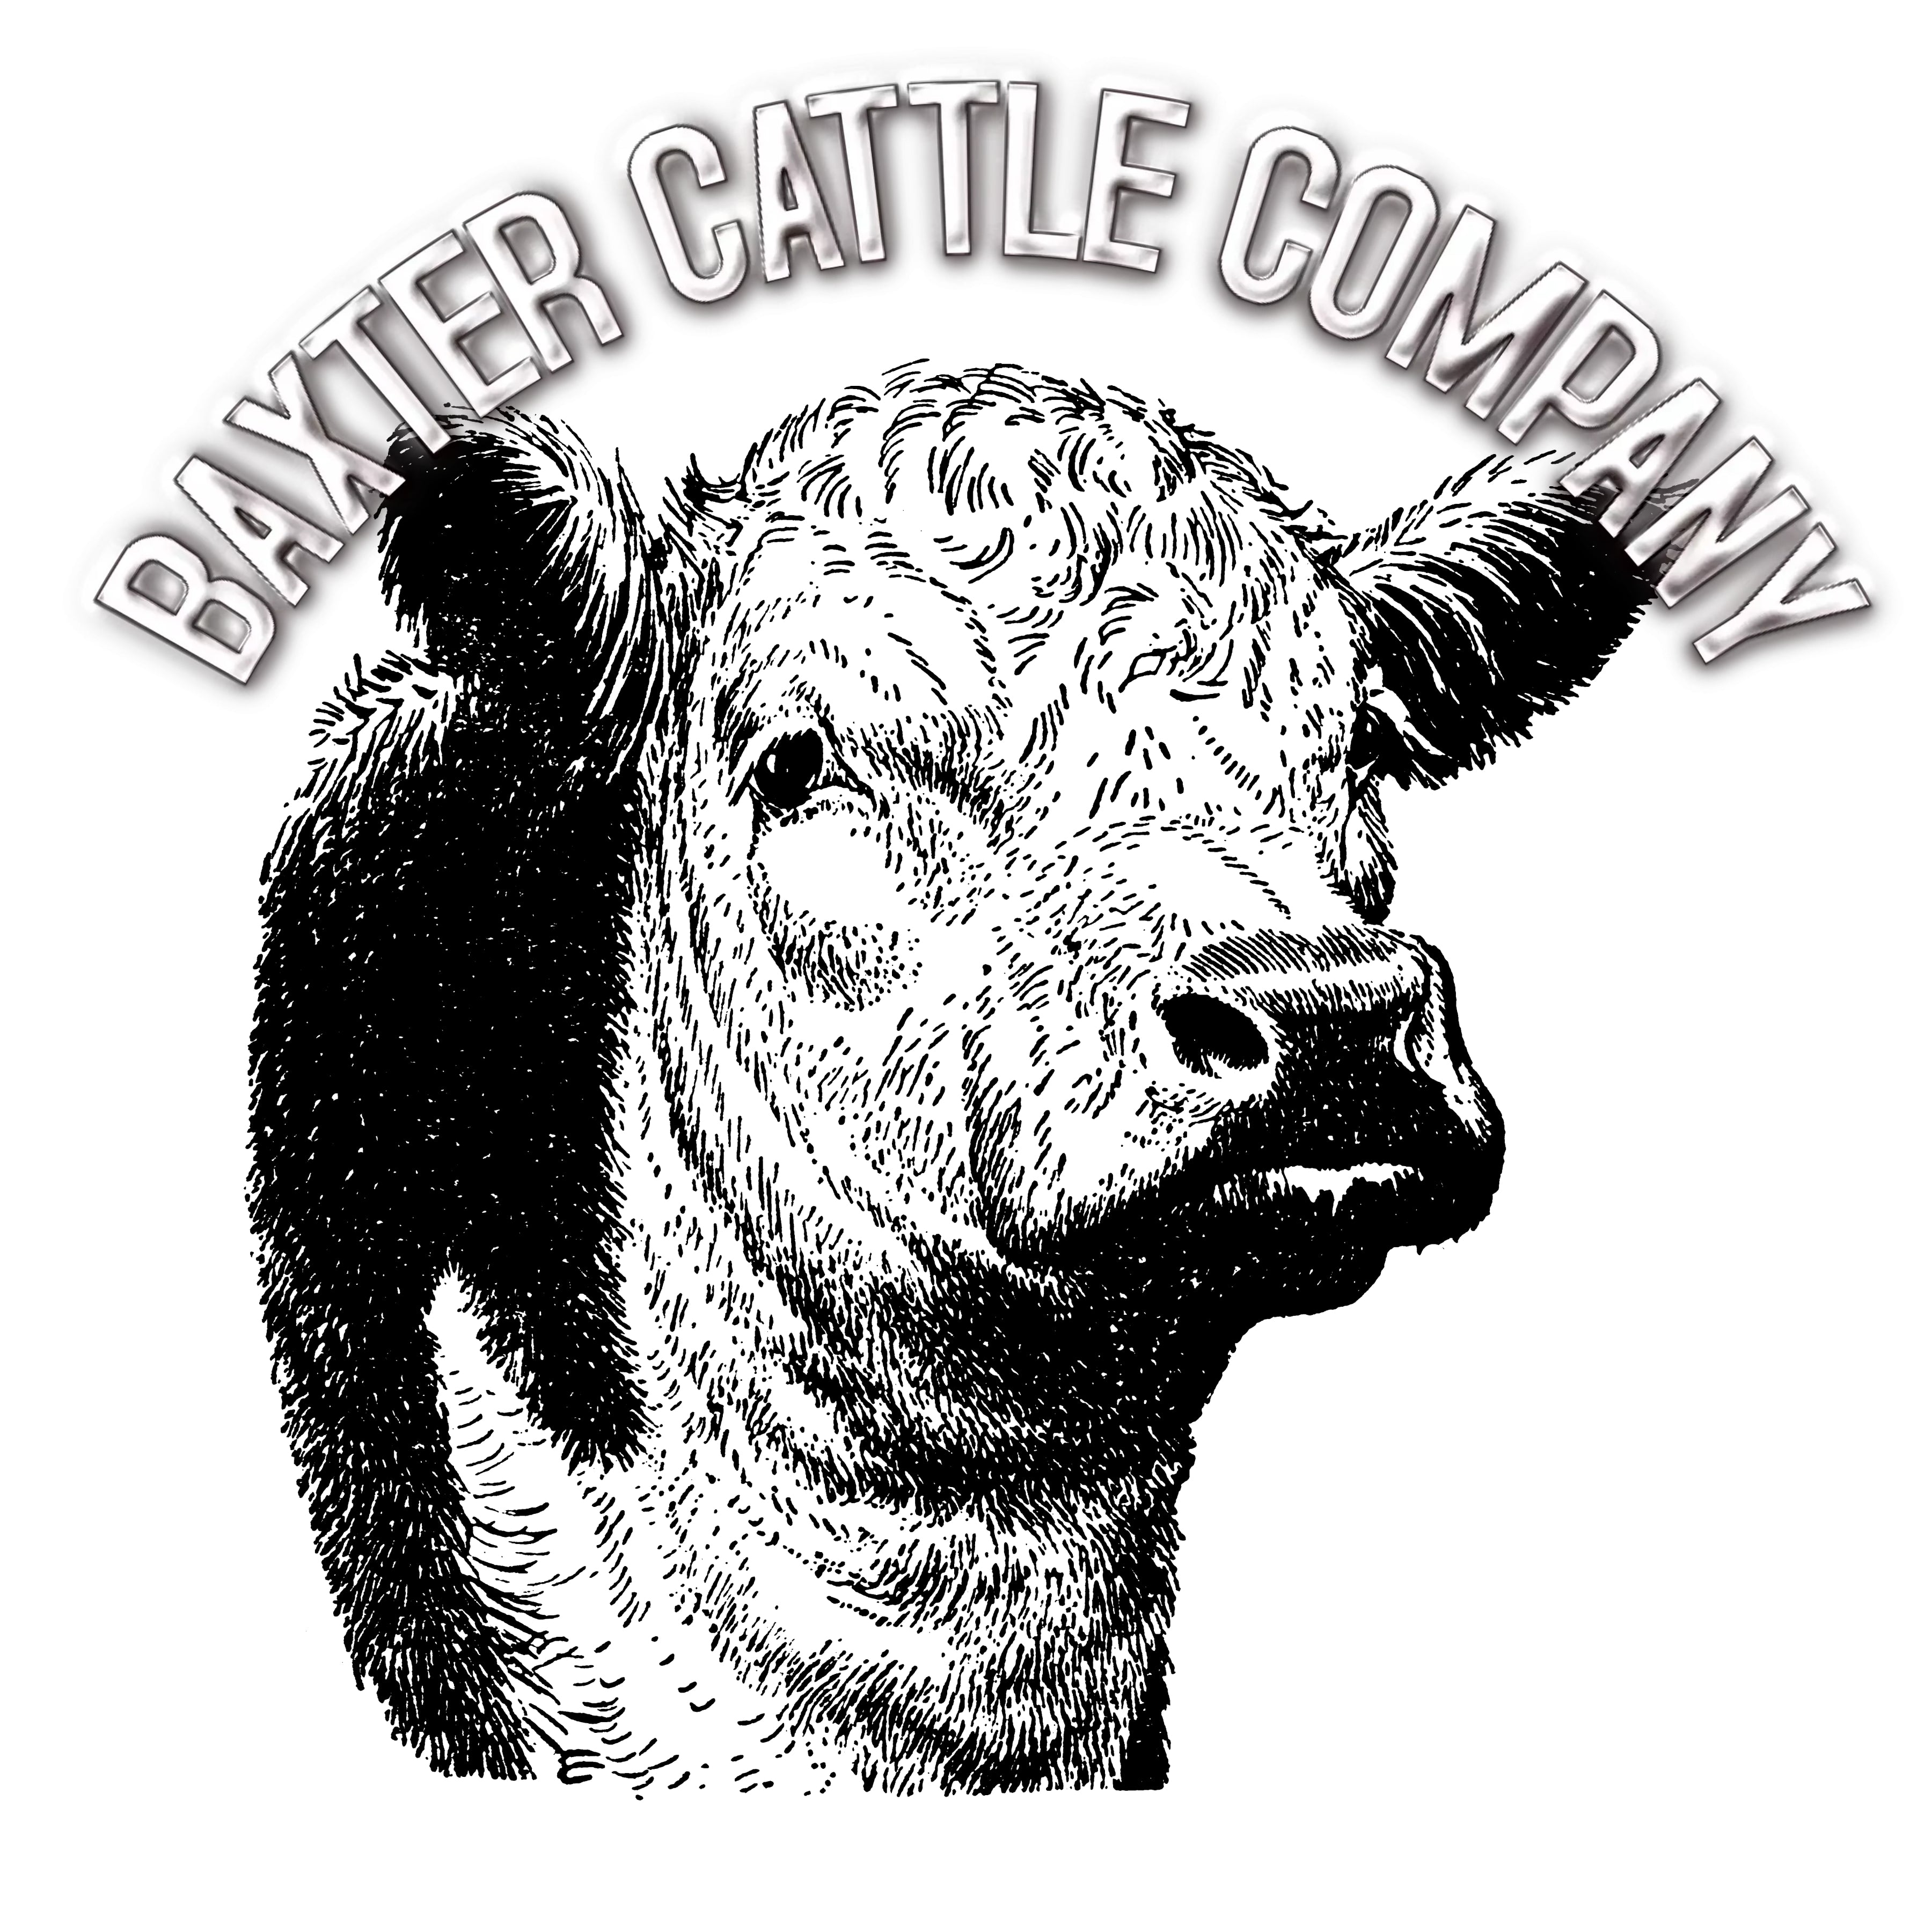 Baxter Cattle Company